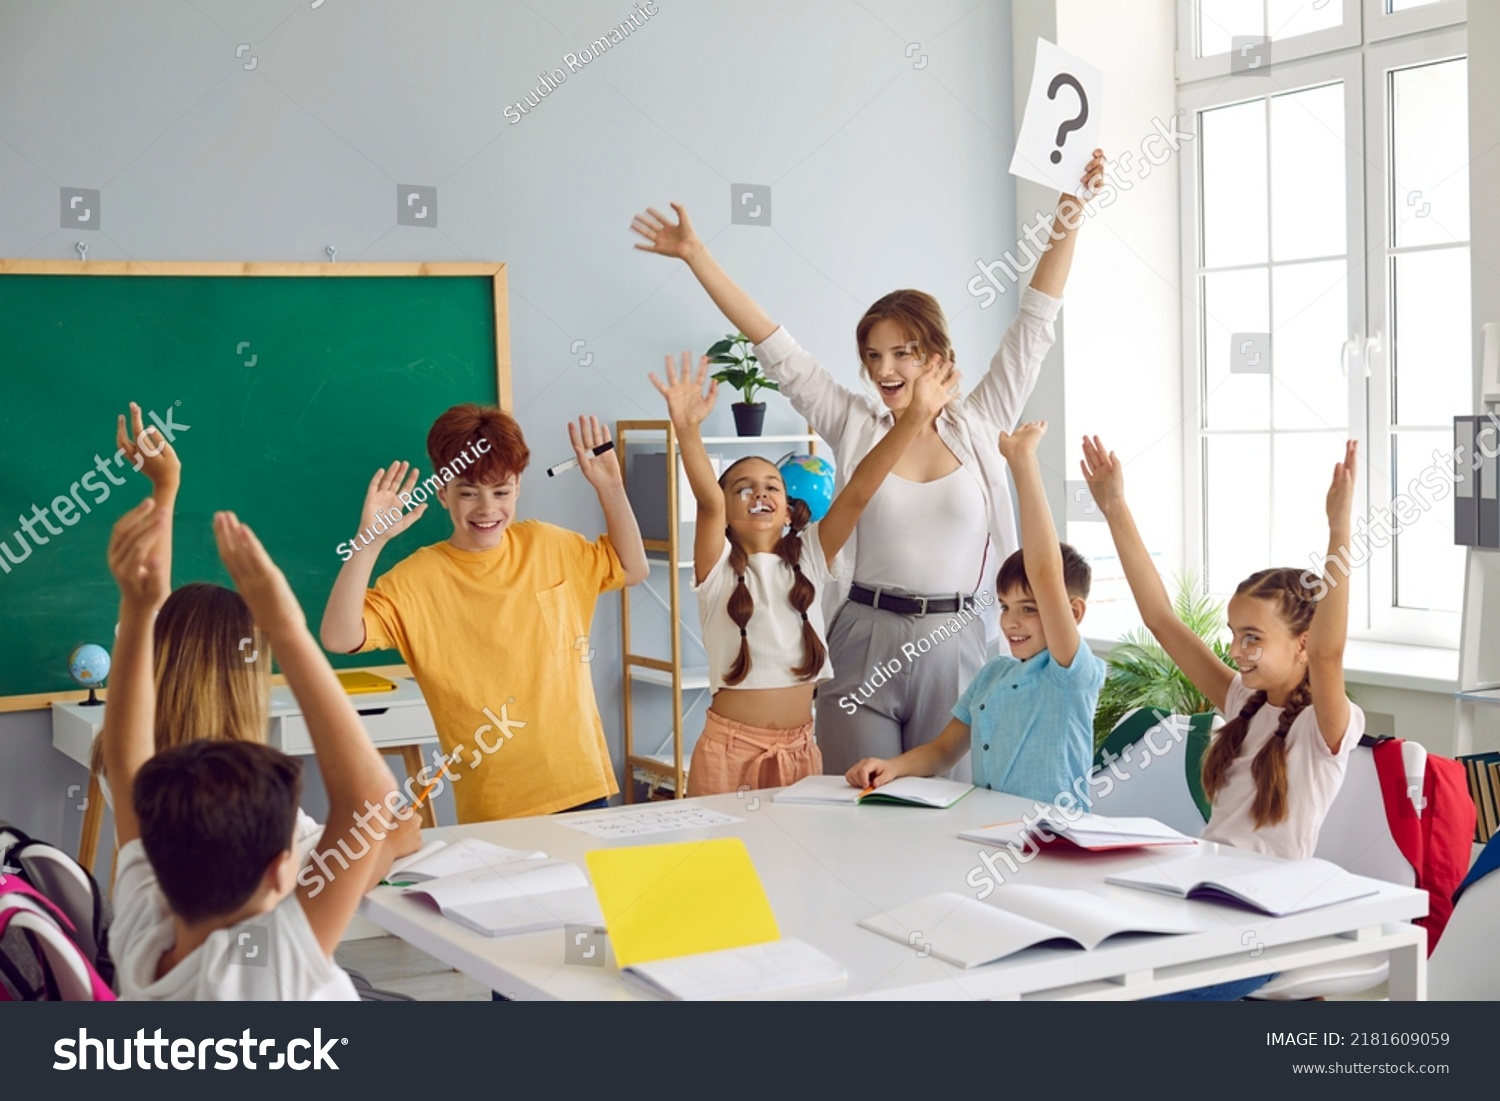 Happy teacher and children having fun in class. Cheerful woman and joyful students play games in the classroom, write in notebooks, answer questions and solve problems together. Back to school concept #2181609059